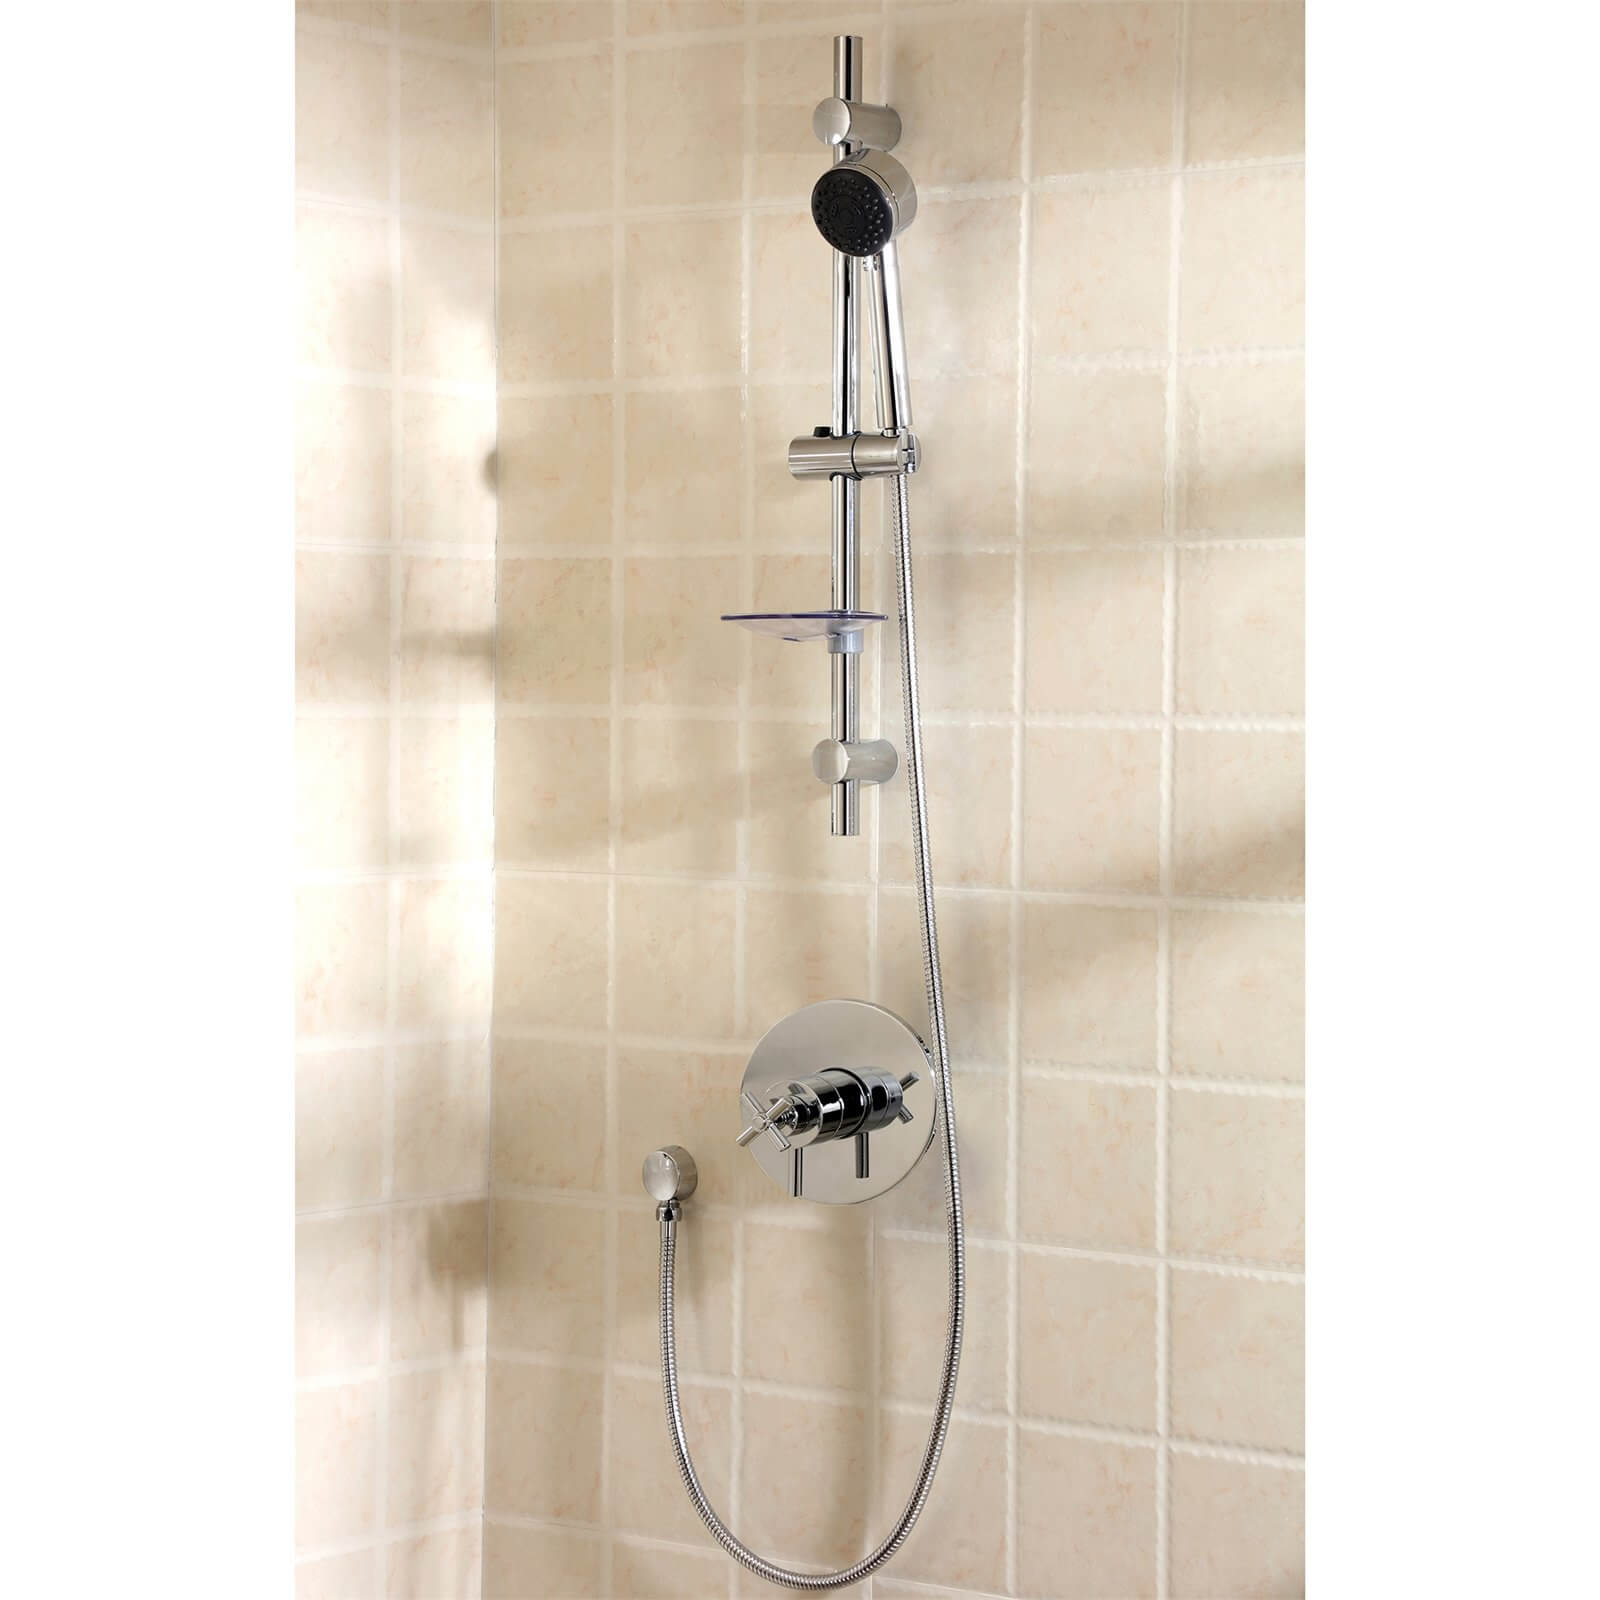 Colwith Thermostatic Concentric Mix Shower Tap - Chrome